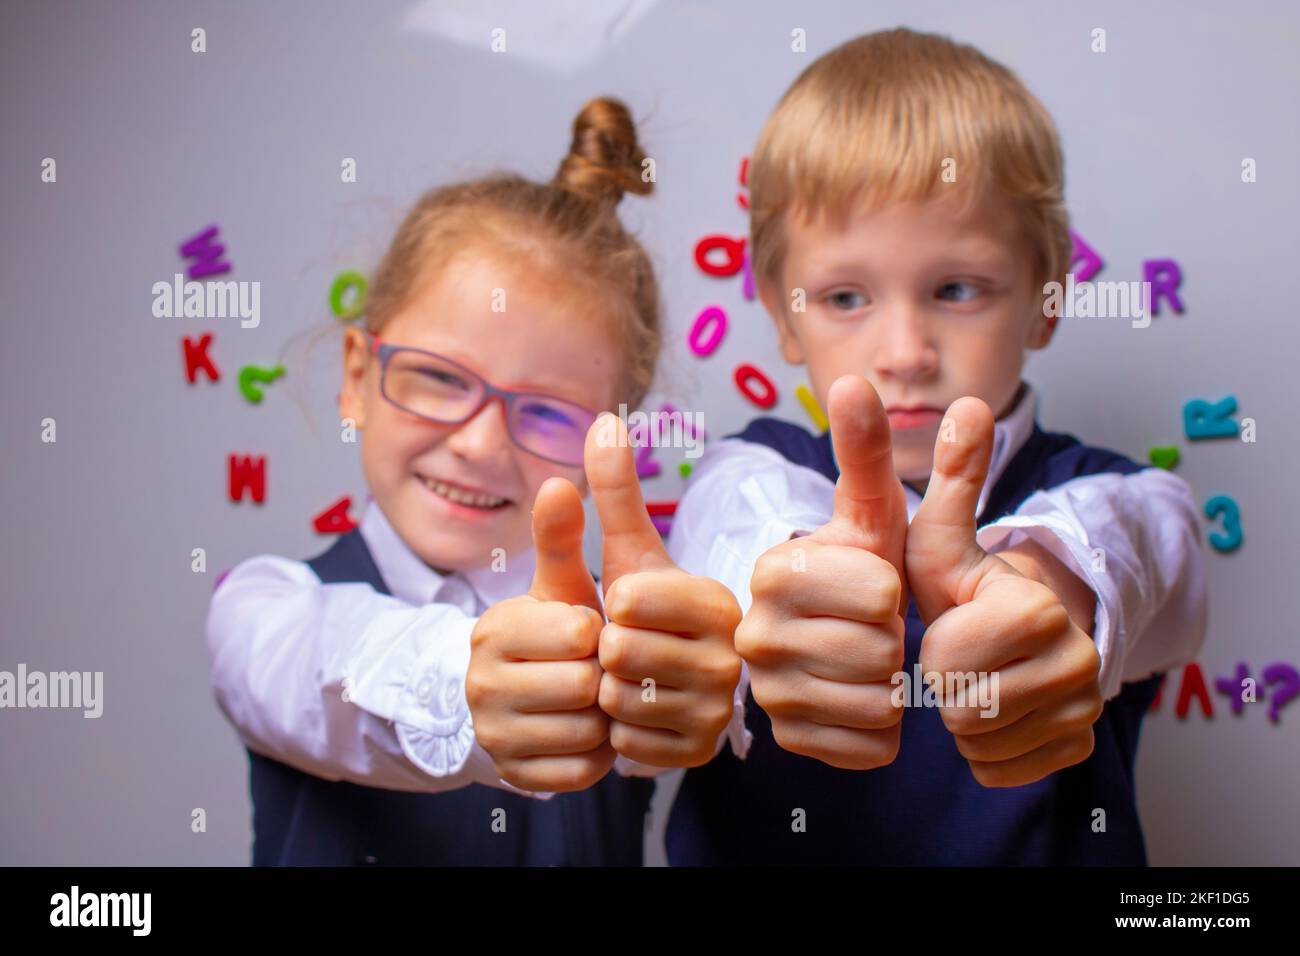 brother and sisiter showing thumbs up together in the classroom Stock Photo